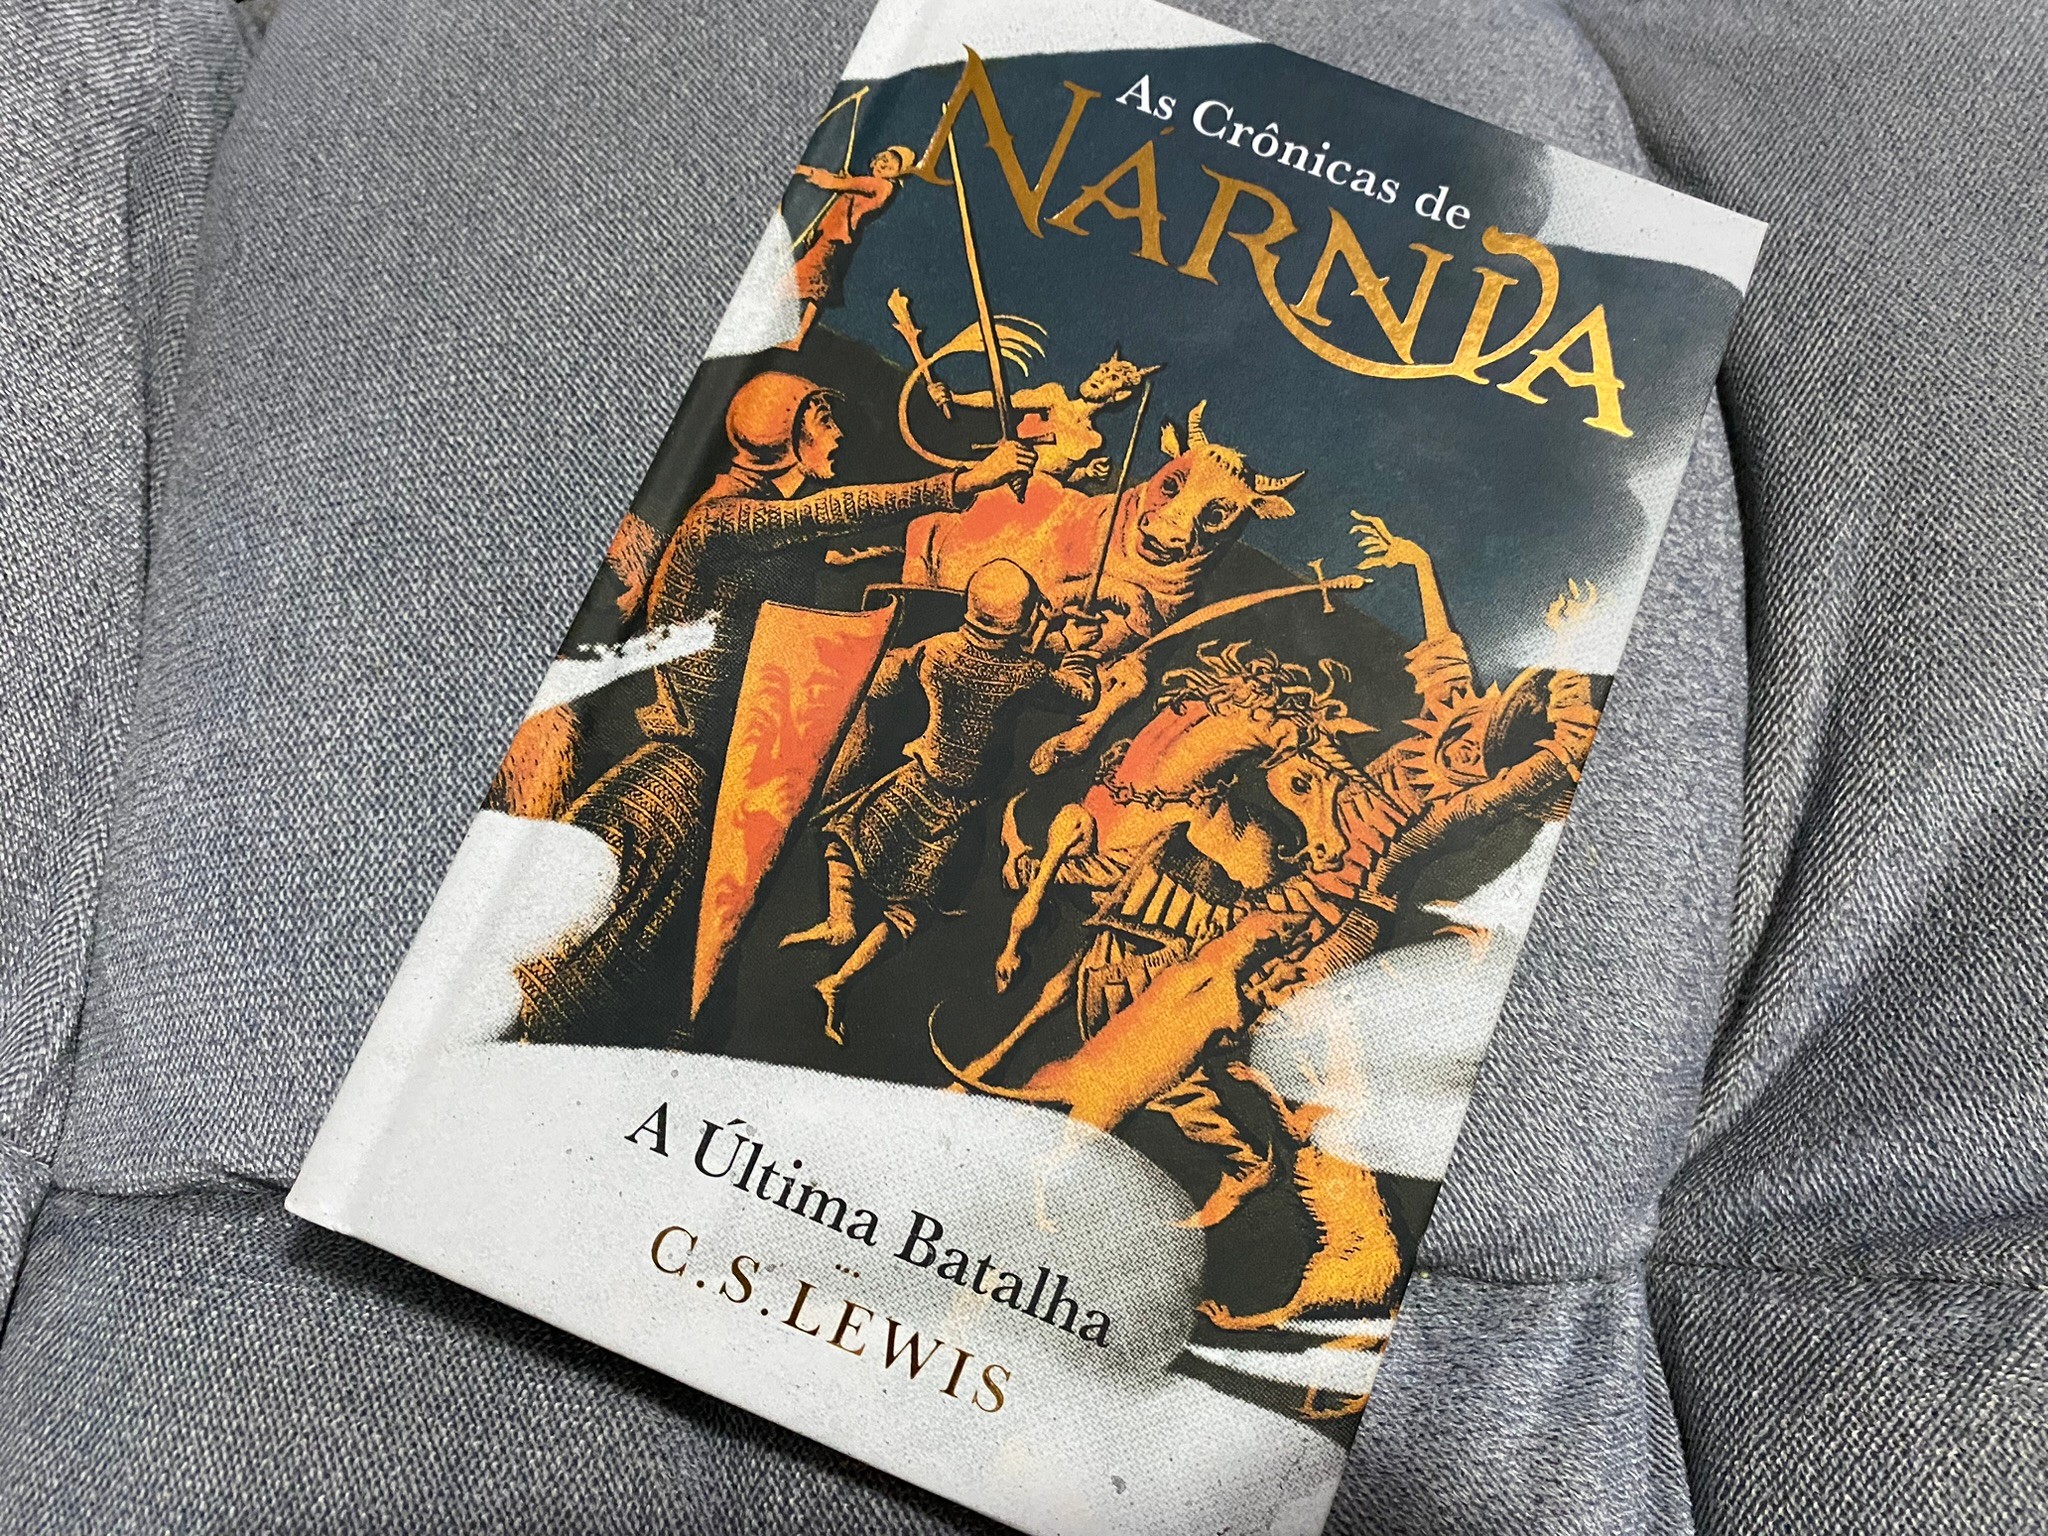 The Chronicles of Narnia The Last Battle – Een majestueuze eindrecensie